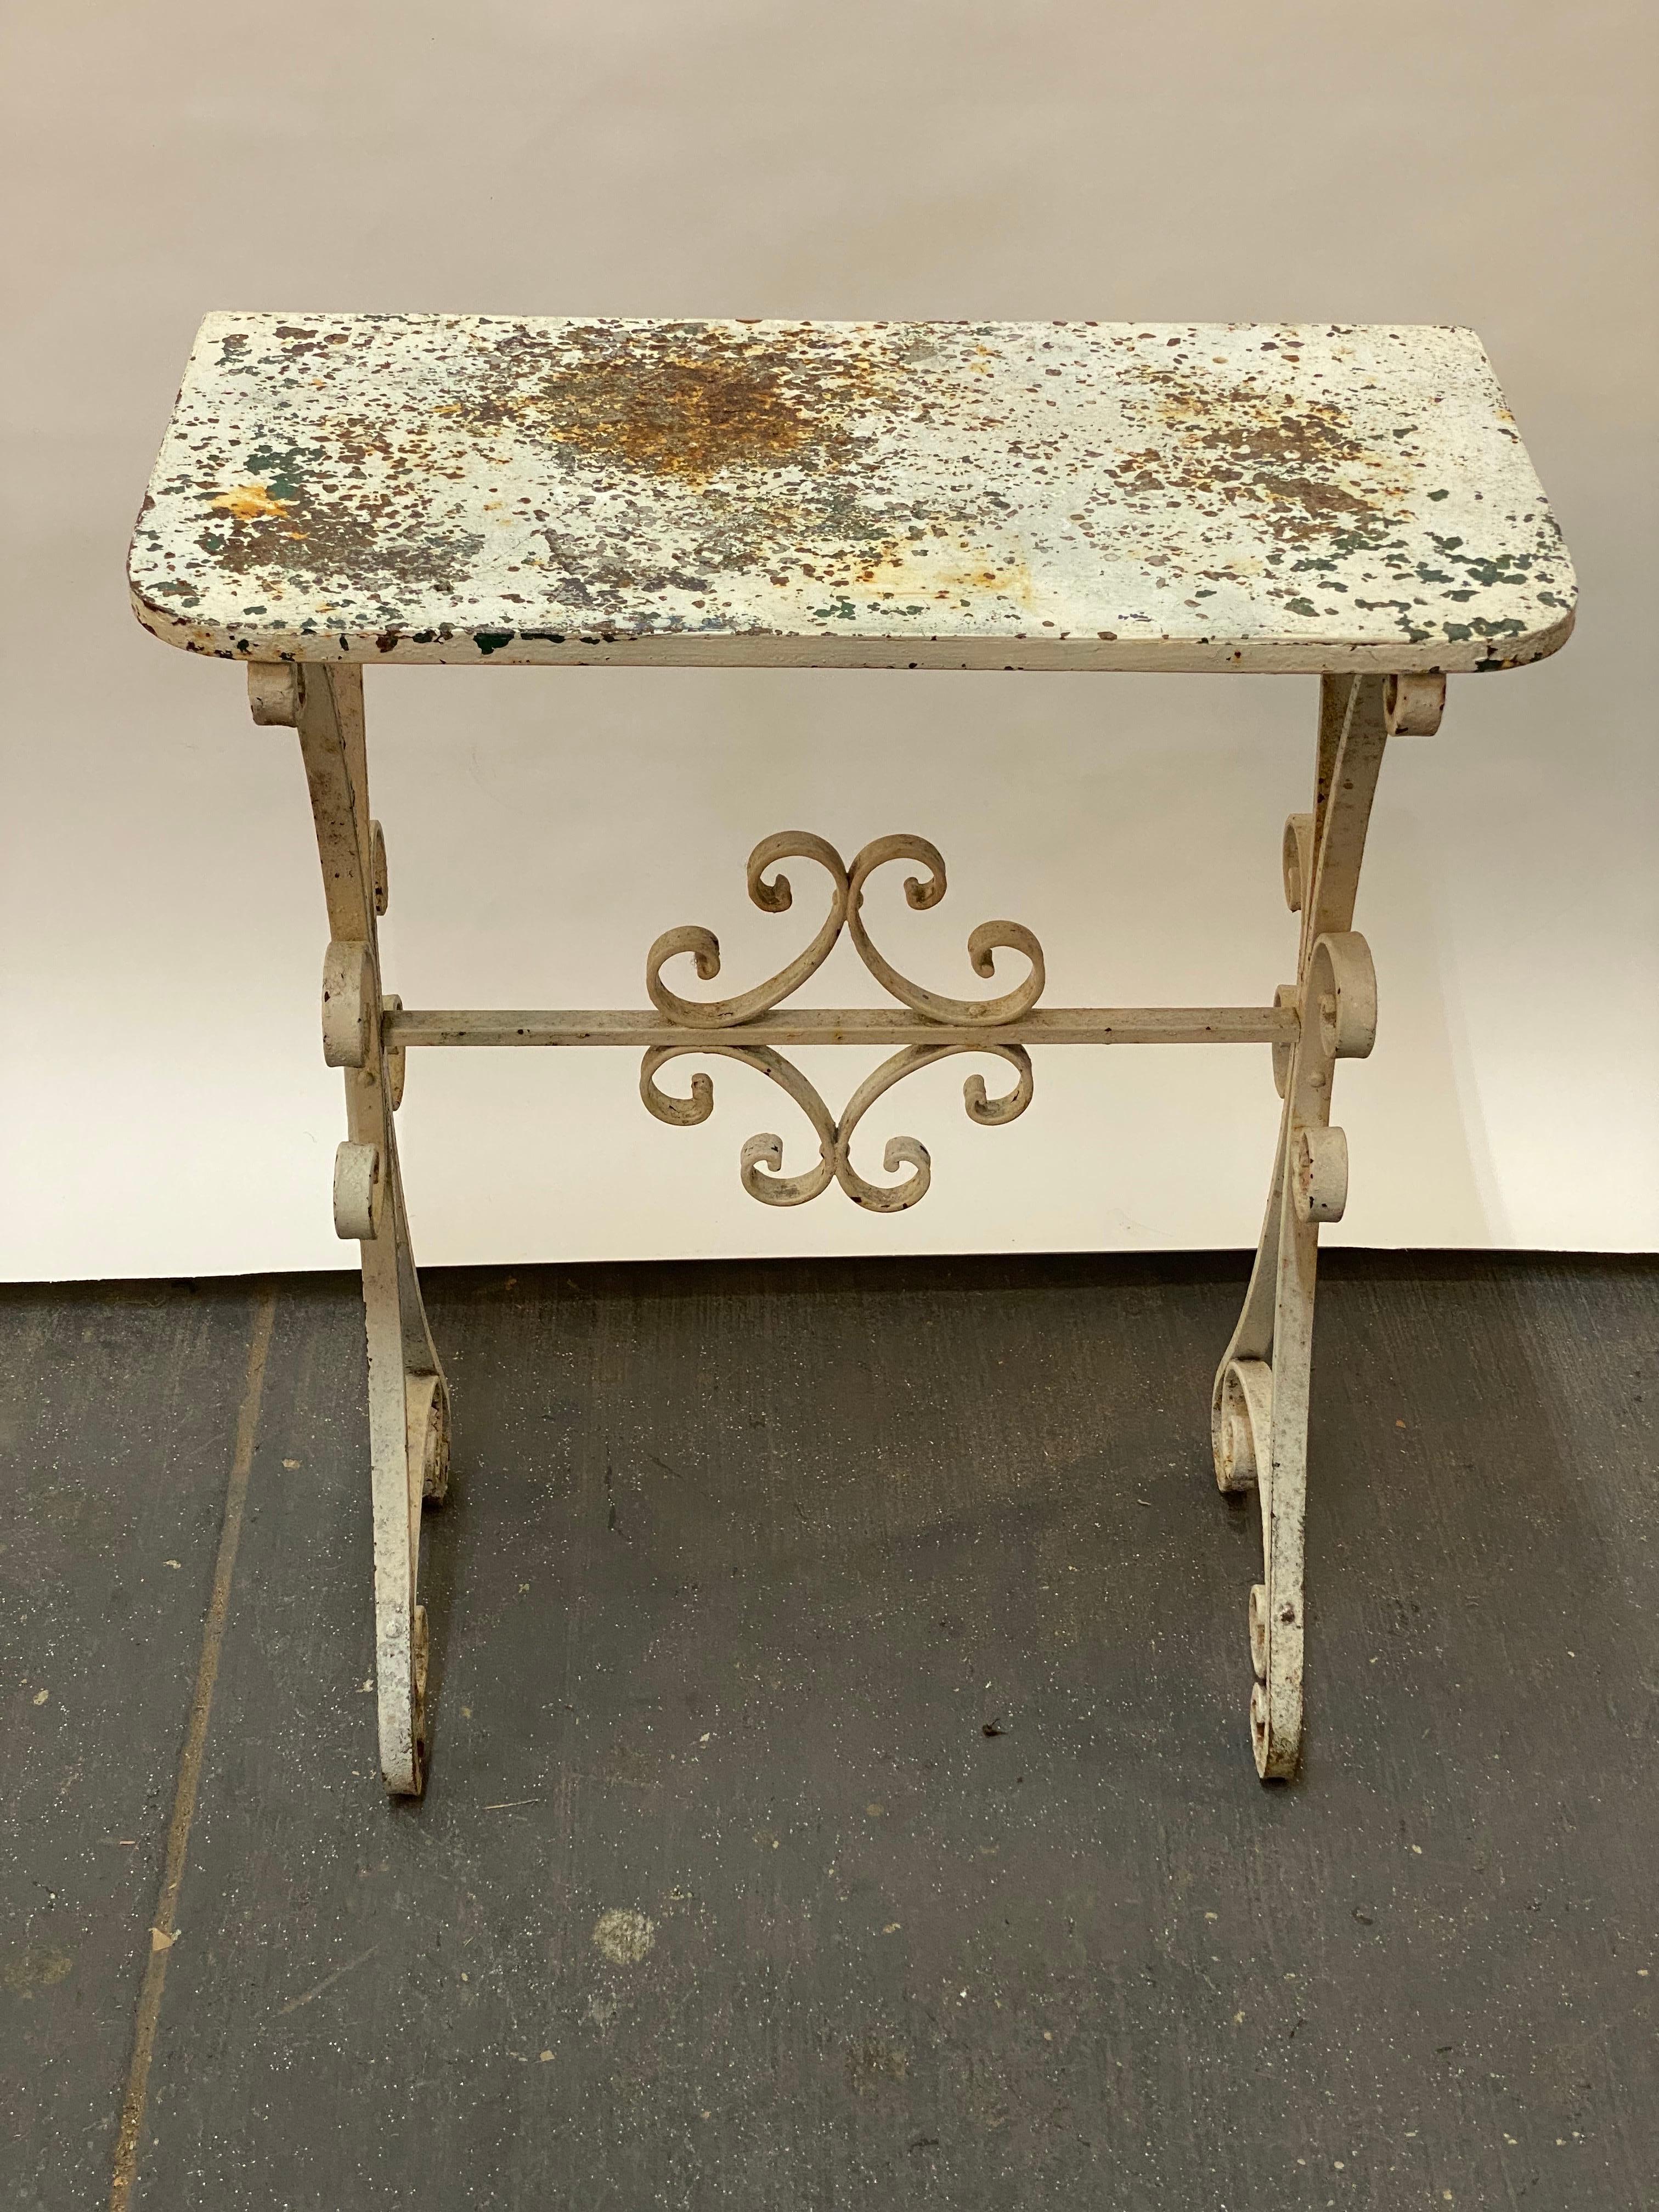 A nicely detailed weathered wrought iron console table. The piece displays several coats of aged and weathered paint, which adds to the piece's charm; white on top of a dark forest green. The stretcher base is scrolled with two stars on each end.